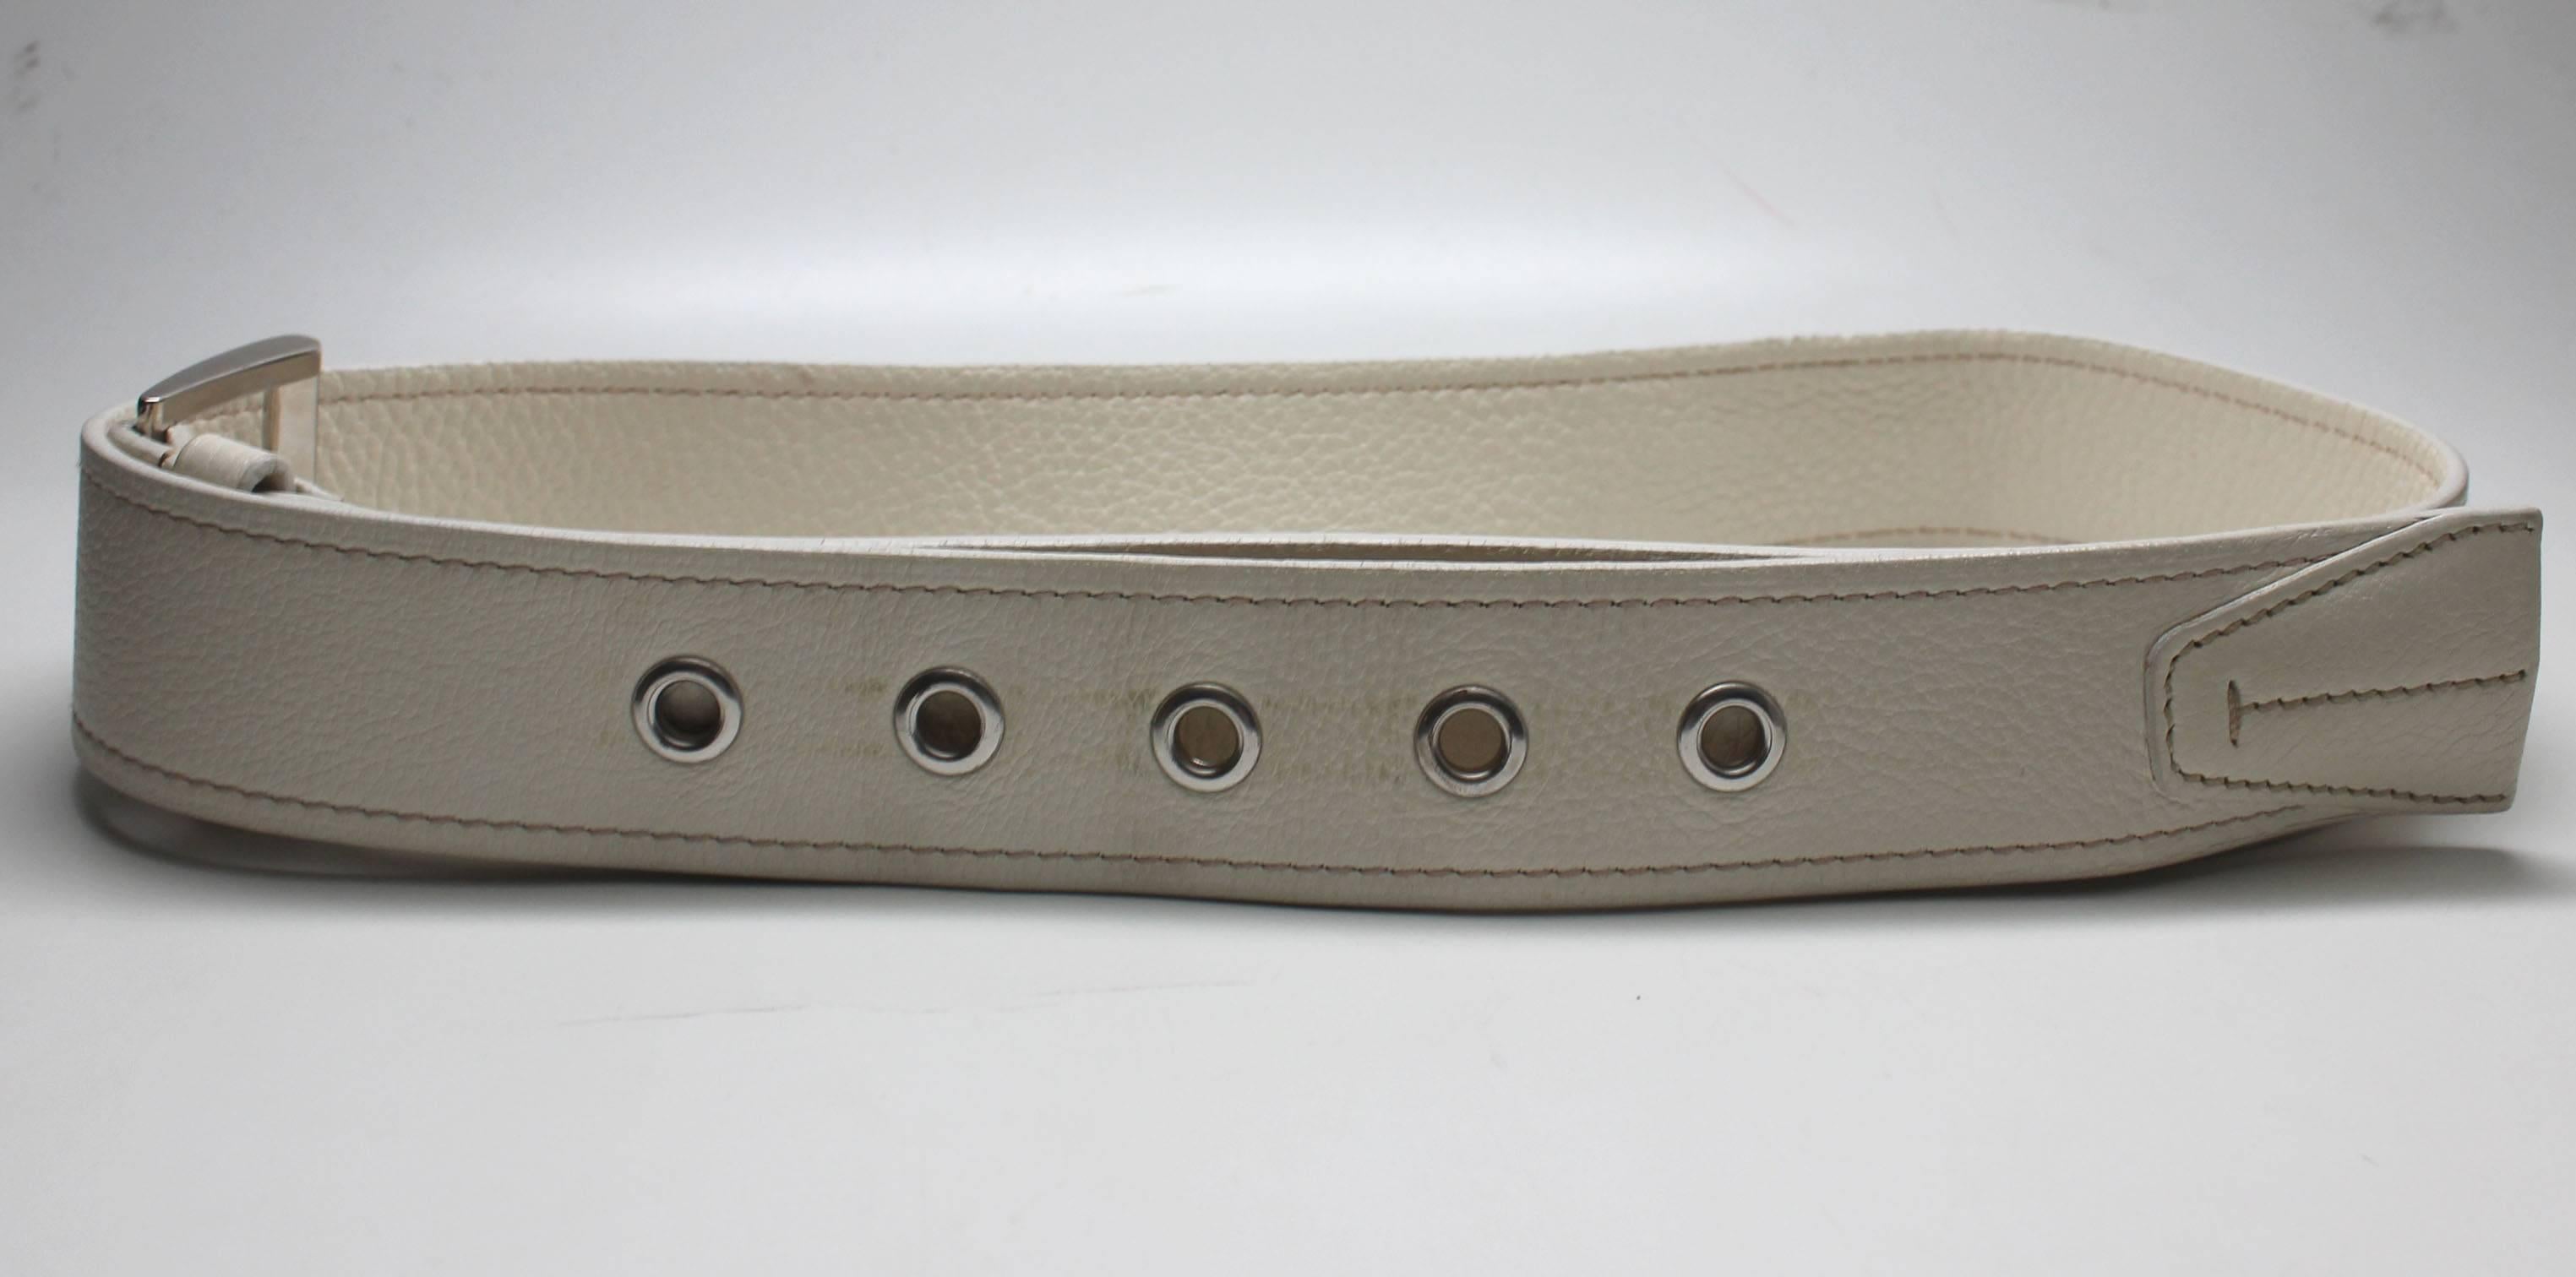 Mens Creme Leather Prada Belt In Excellent Condition For Sale In New York, NY